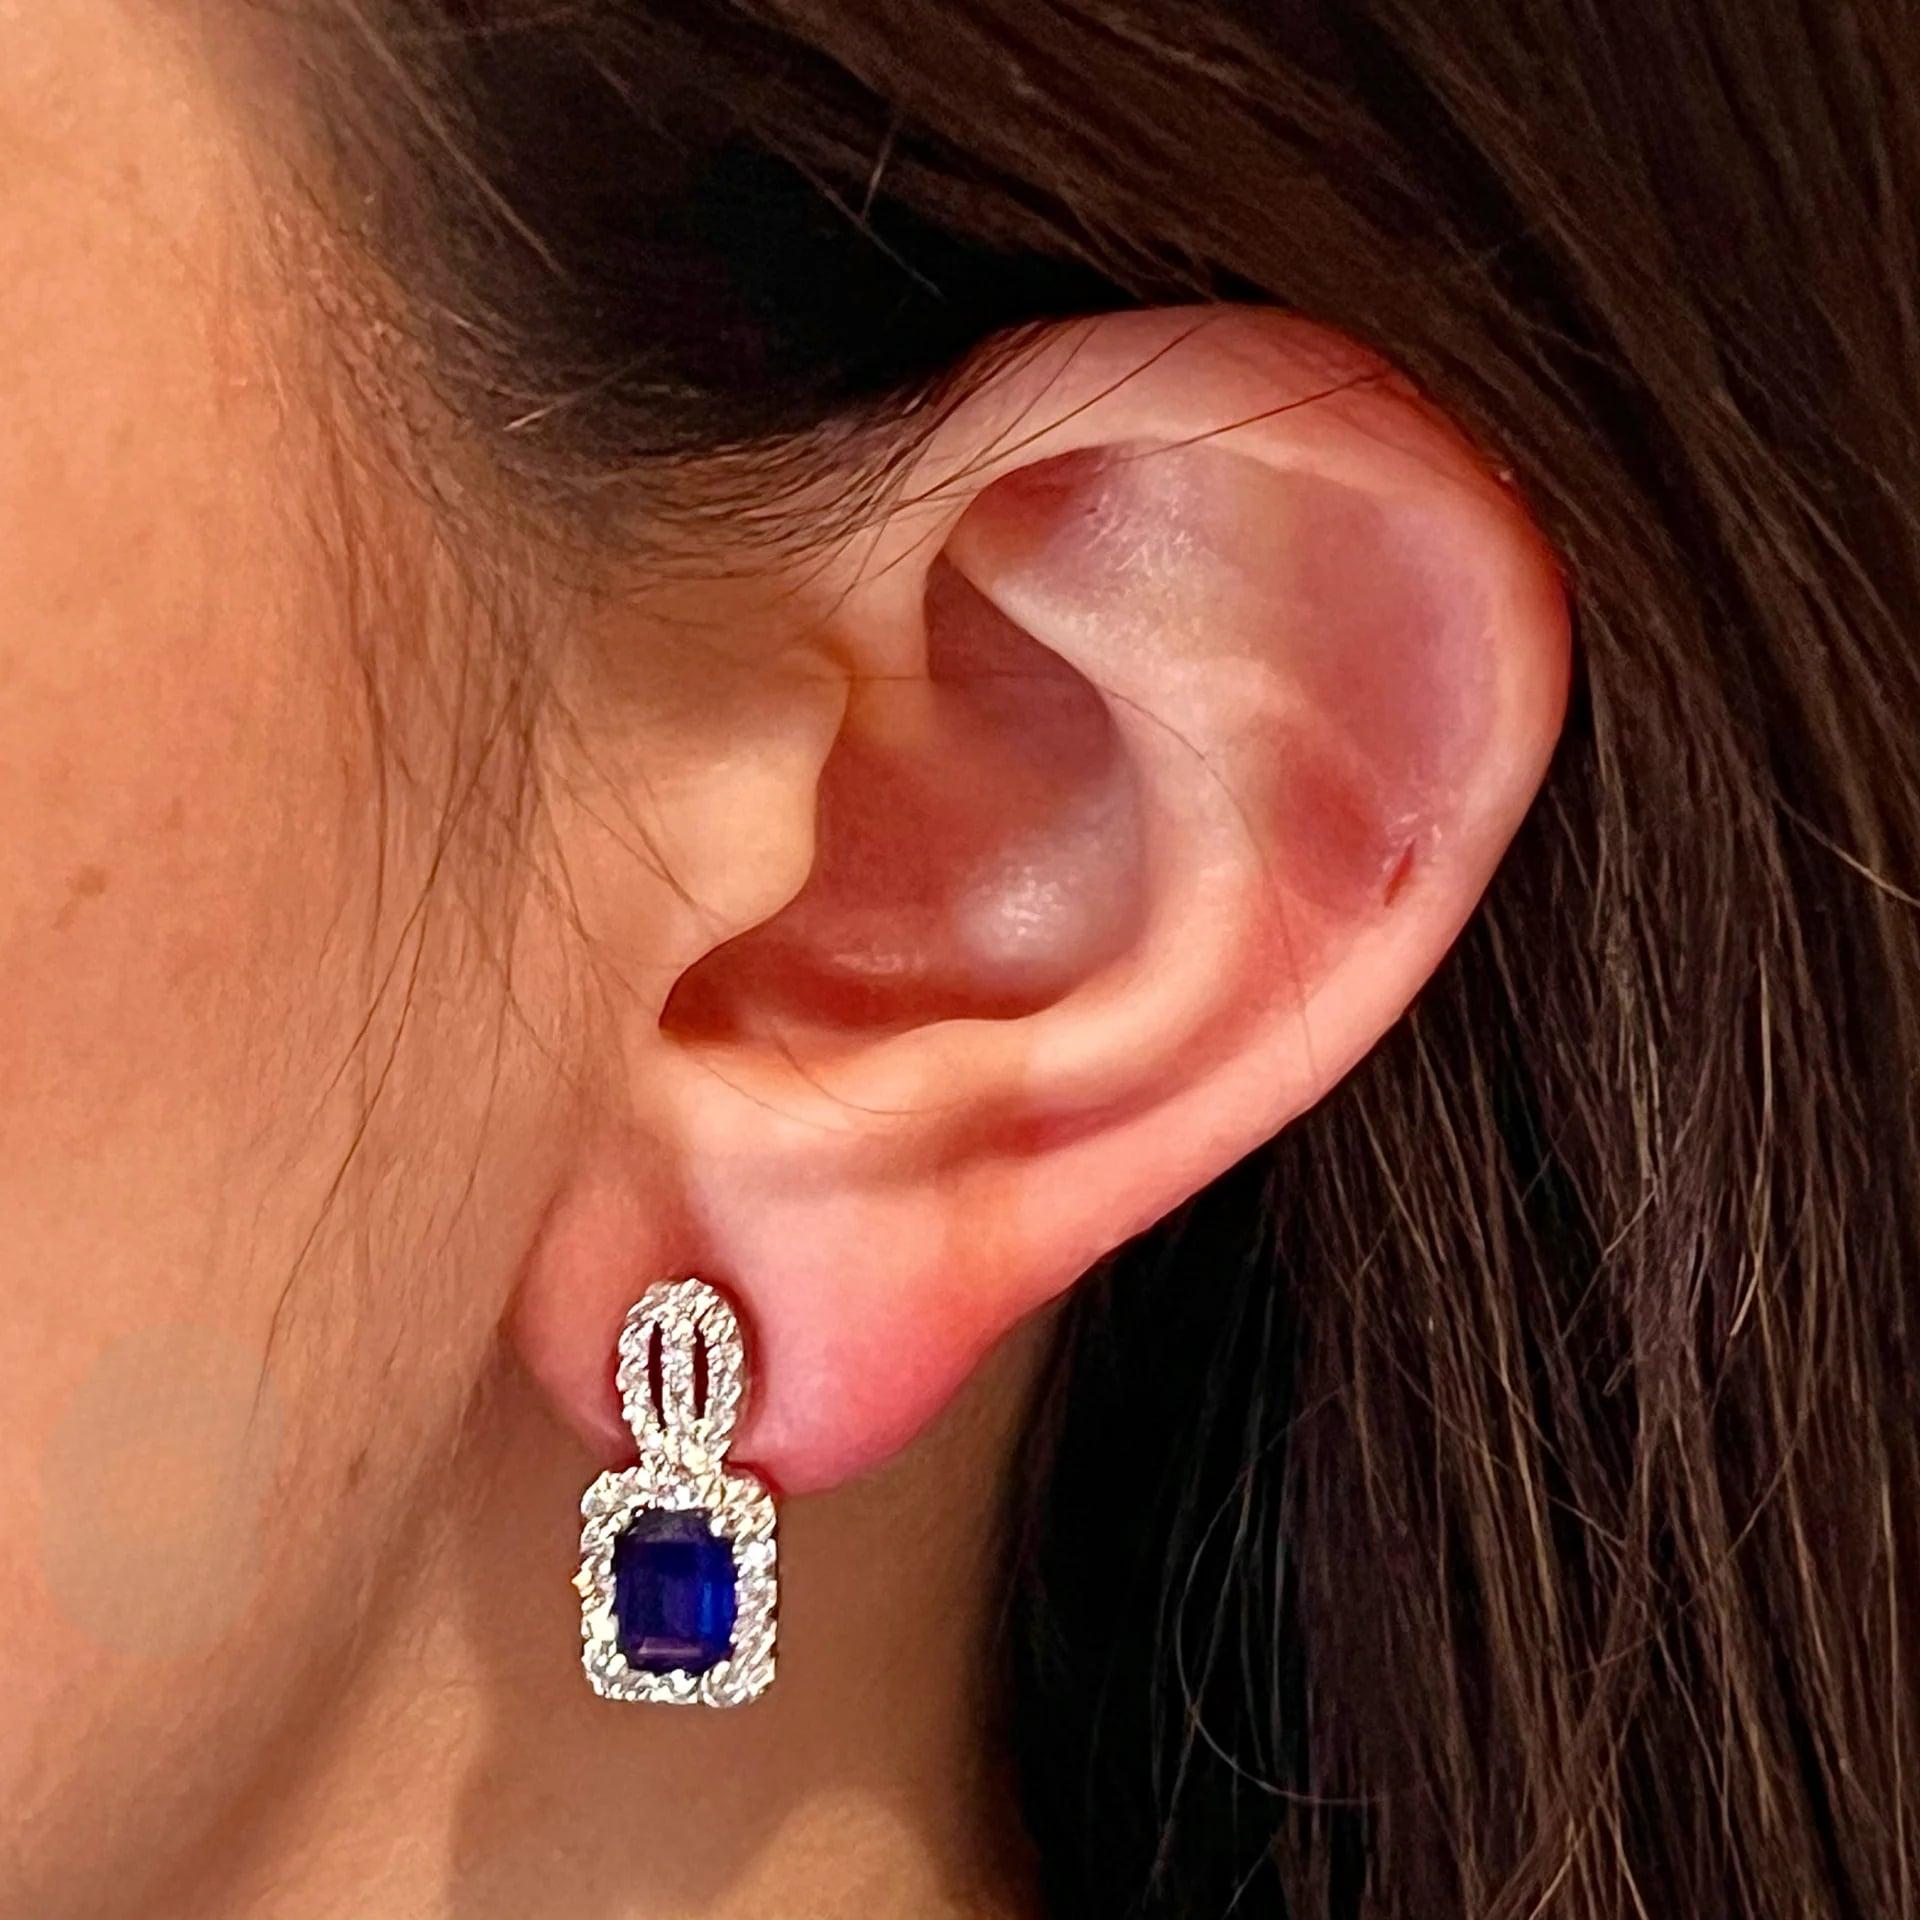 Unique Natural Sapphire Diamond Stud Earrings 14k W Gold 2.84 TCW

Certified $6,950 215410

Nothing says, “I Love you” more than Diamonds and Pearls!

These Sapphire earrings have been Certified, Inspected, and Appraised by Gemological Appraisal